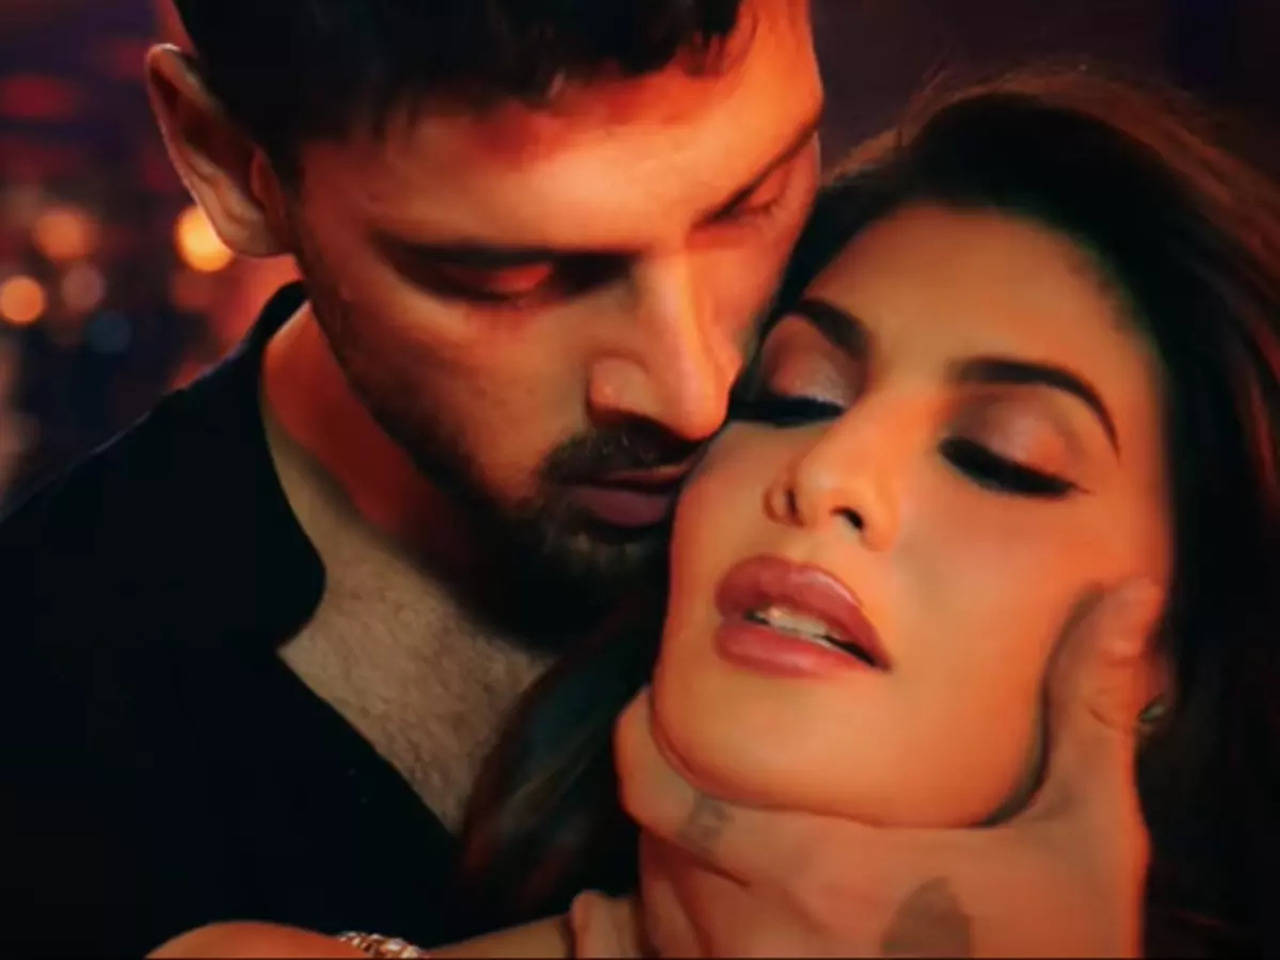 Michele Morrone and Jacqueline Fernandez set the screen ablaze with their chemistry in Mud Mud Ke teaser - WATCH Hindi Movie News pic